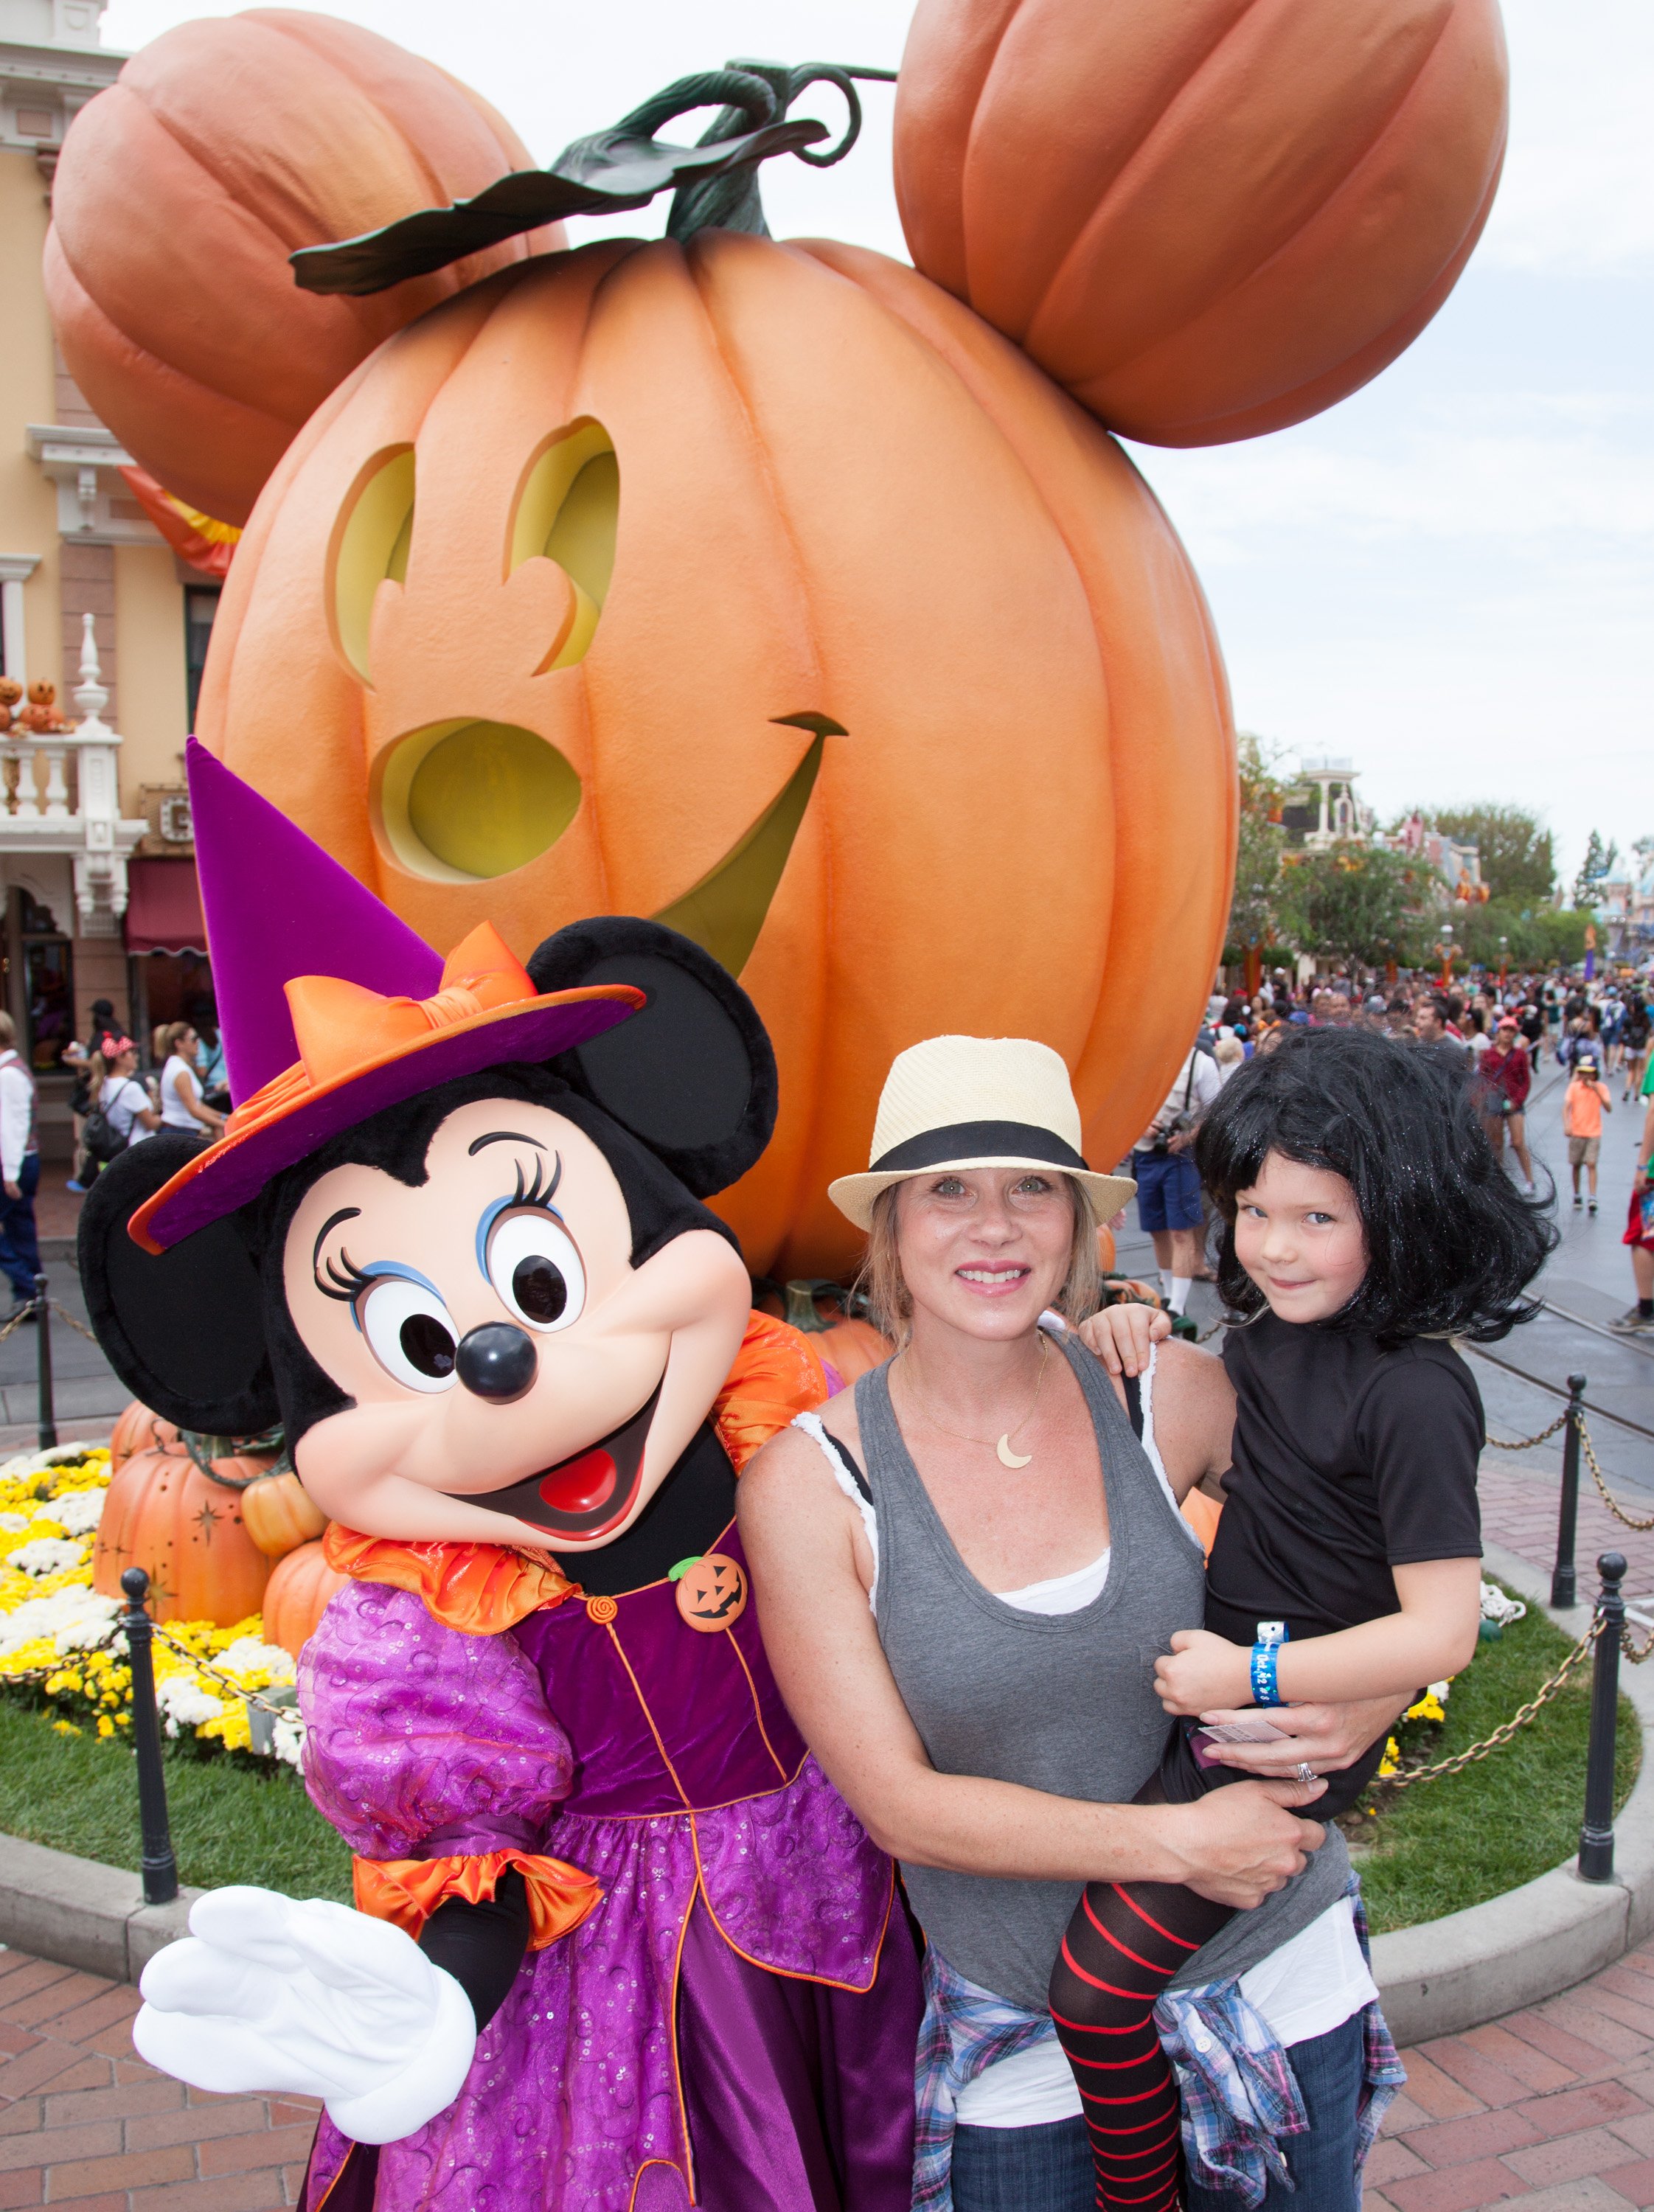 Christina Applegate and daughter Sadie LeNoble celebrate "Halloween Time" with Minnie Mouse at Disneyland on October 12, 2015 in Anaheim, California | Source: Getty Images 